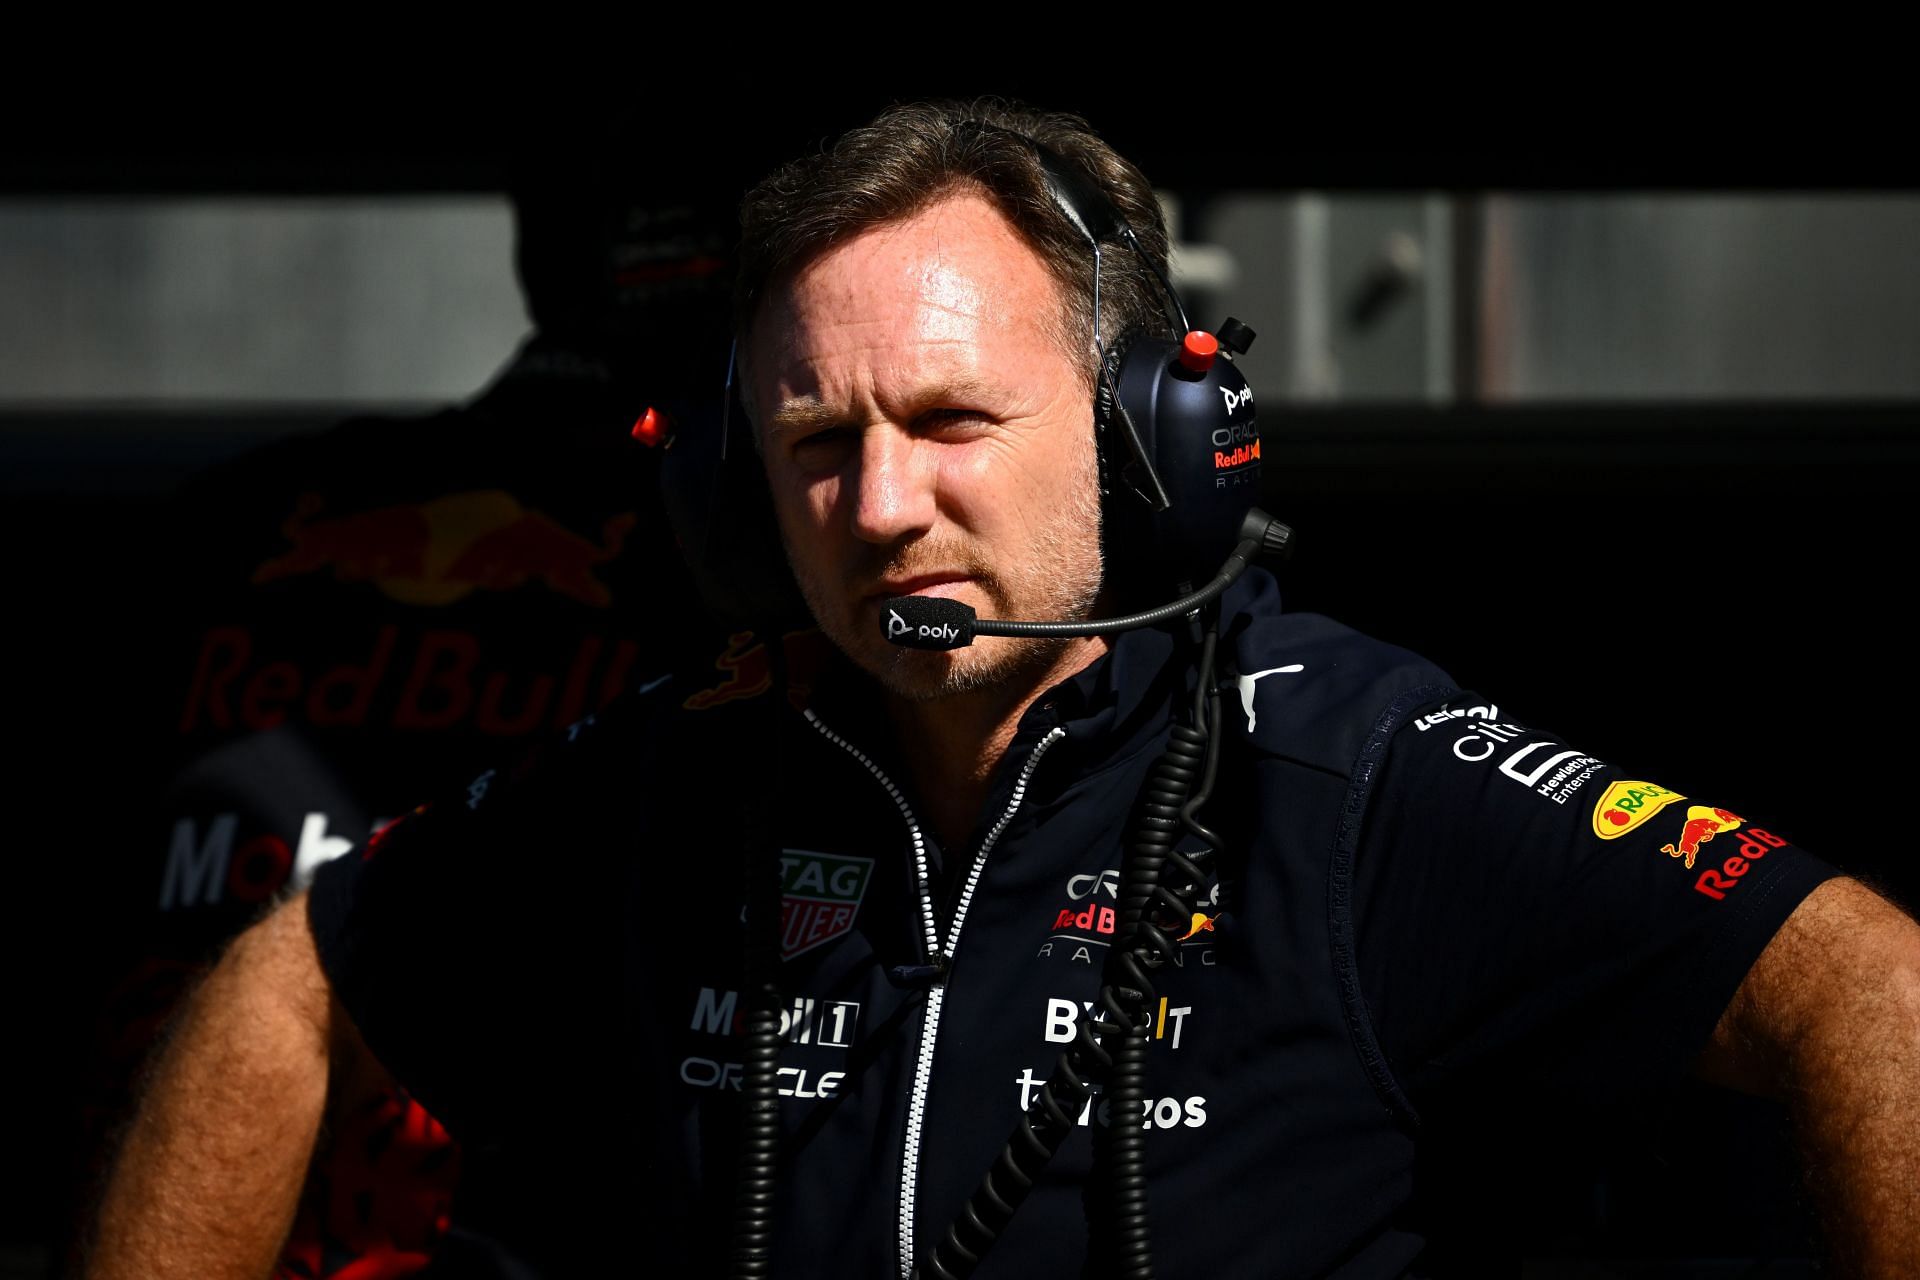 Red Bull Racing Team Principal Christian Horner looks on from the pitwall during practice ahead of the F1 Grand Prix of Australia at Melbourne Grand Prix Circuit on April 08, 2022 in Melbourne, Australia. (Photo by Clive Mason/Getty Images)